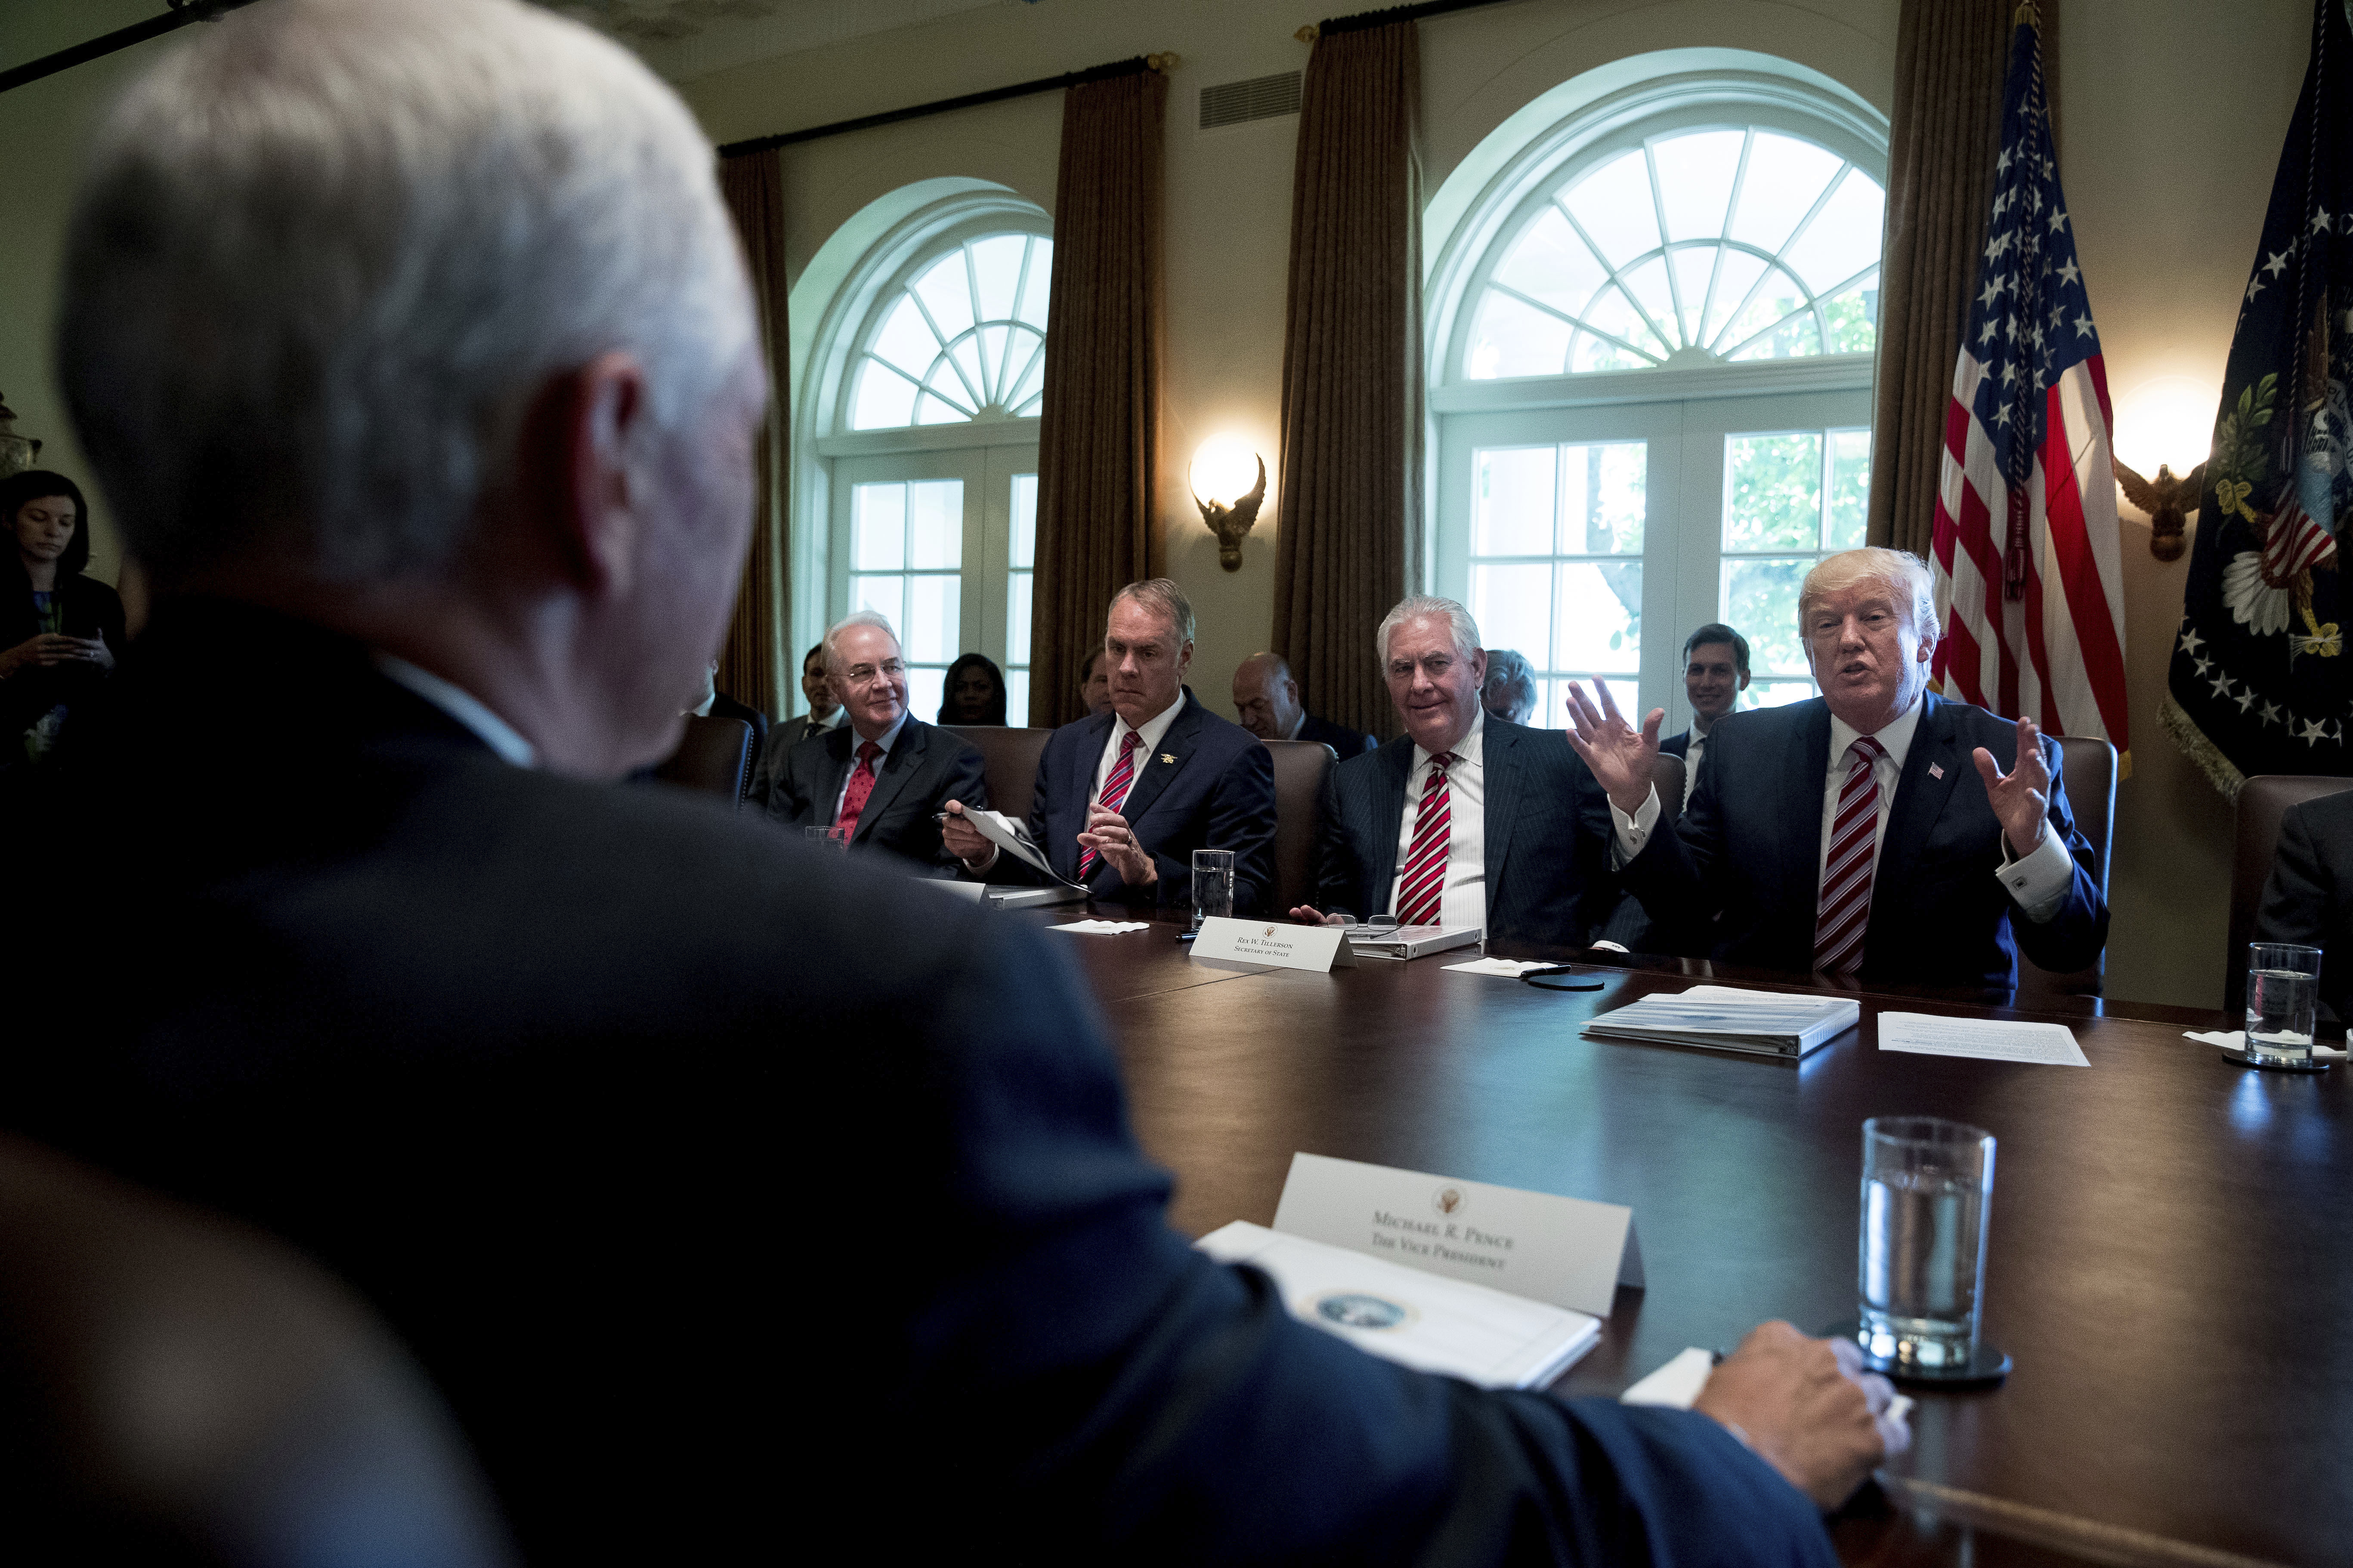 President Trump speaks during a Cabinet meeting on June 12, 2017. From left are, Vice President Pence, foreground, then-Health and Human Services Secretary Tom Price, Interior Secretary Ryan Zinke and Secretary of State Rex Tillerson and the president. Price was fired by Trump last year, Tillerson was fired last week. (Photo by Andrew Harnik/AP)